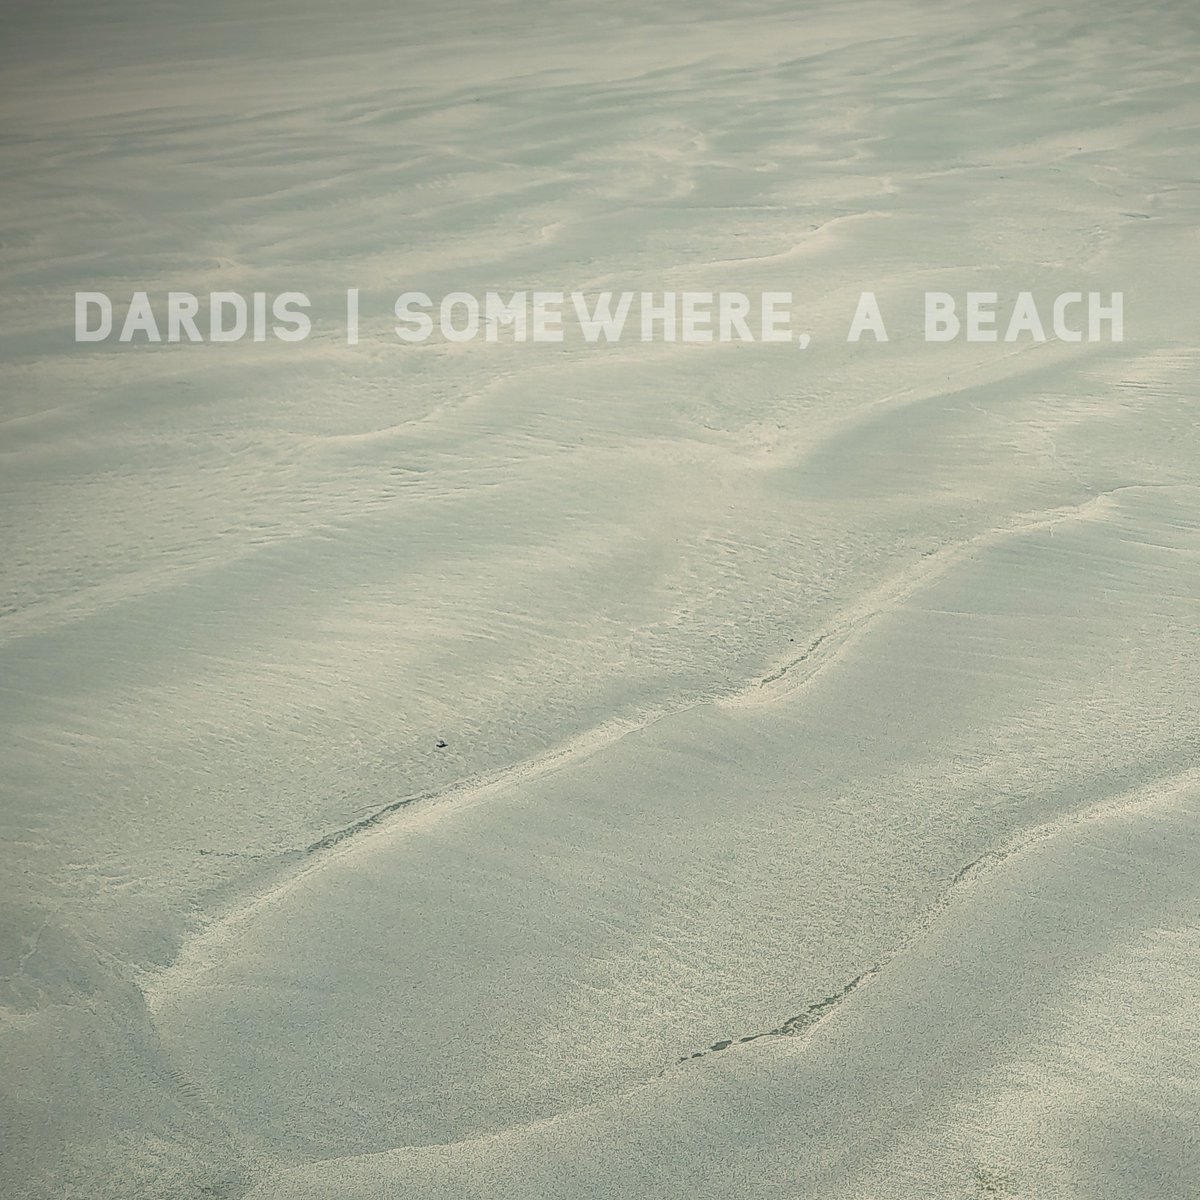 Following the new EP just released on Plataforma Records, this week has brought news of another EP, 'Somewhere, A Beach', being released on Warm Milk Recordings this Friday (happily coinciding with my birthday), and an album with Adventurous Music, to be released next Feb!